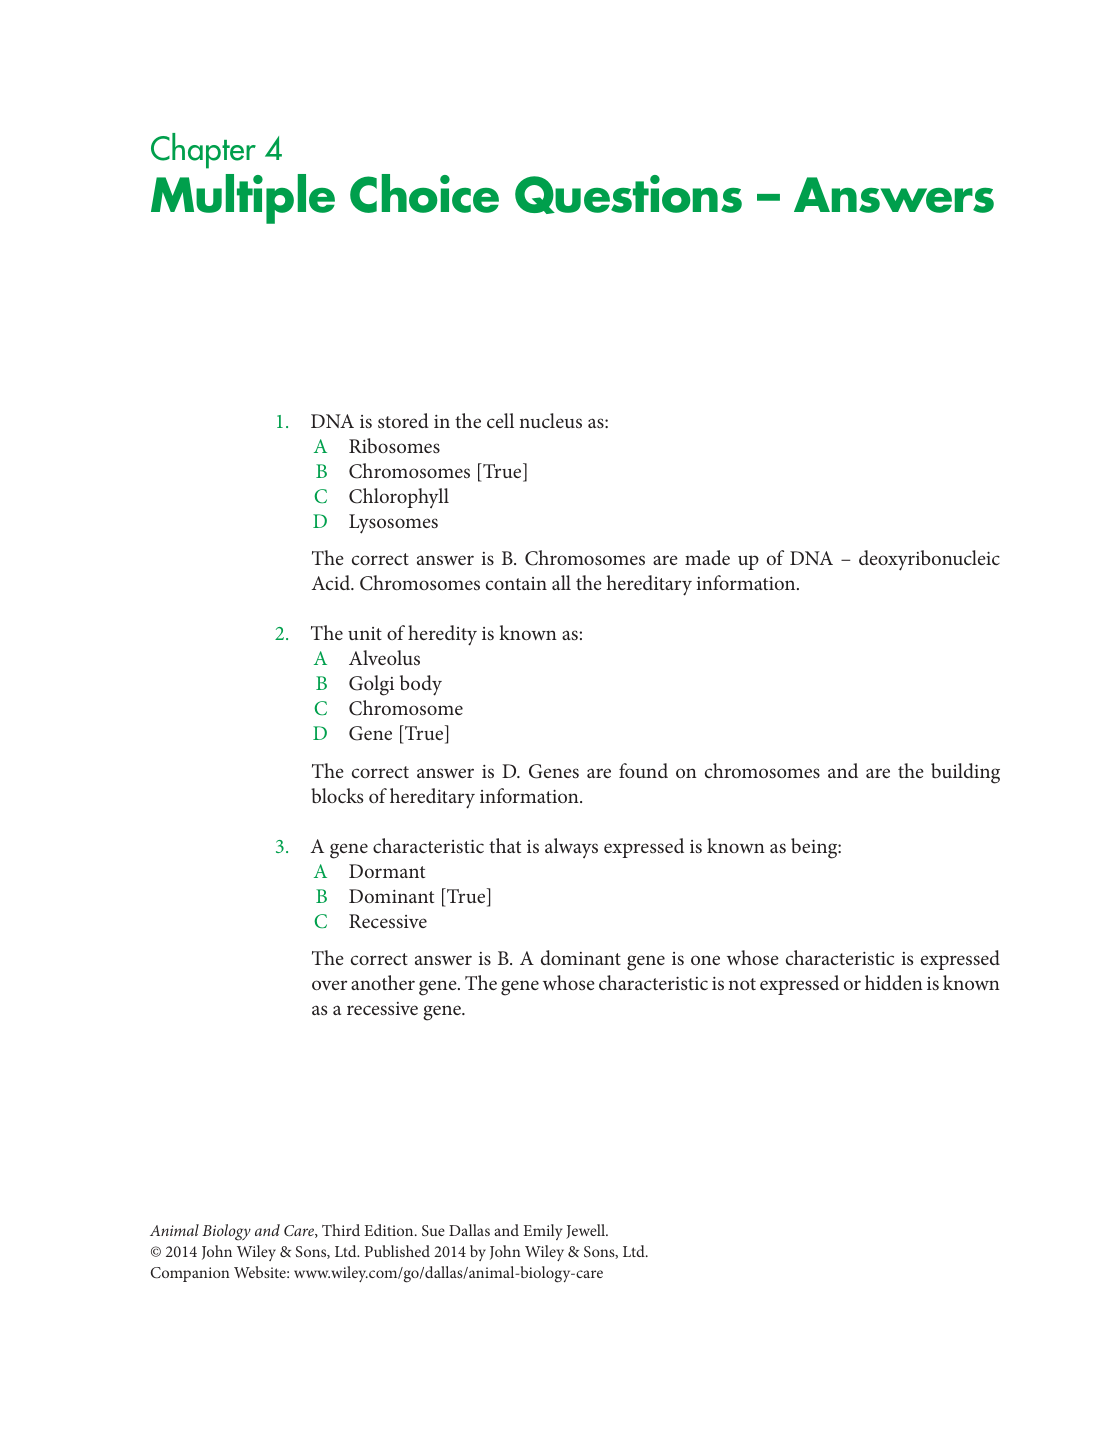 Multiple choice questions and answers